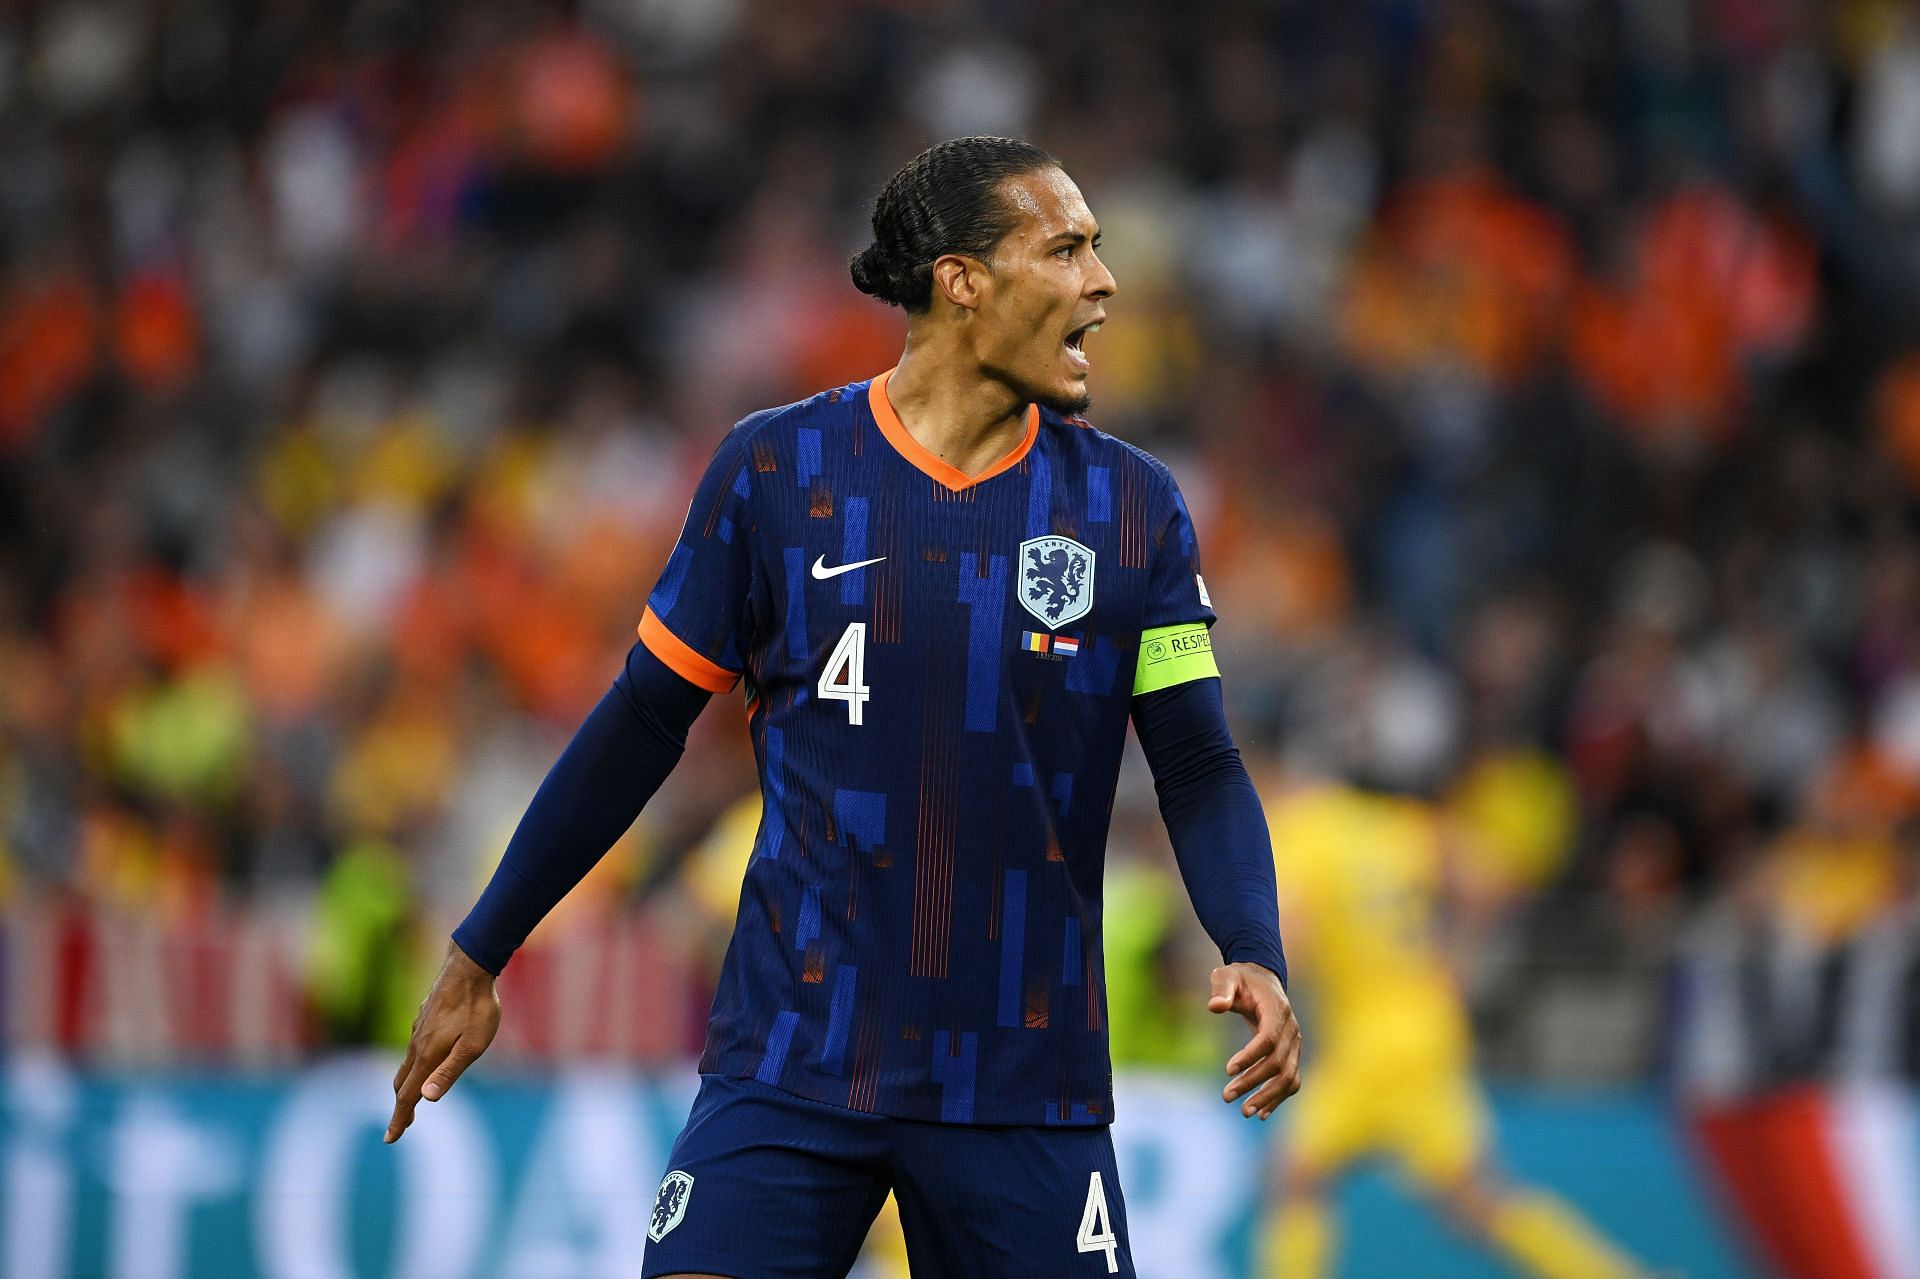 “He’s not focused” - Ex-Premier League star labels Van Dijk as ‘sloppy’ before Netherlands win over Romania at Euro 2024